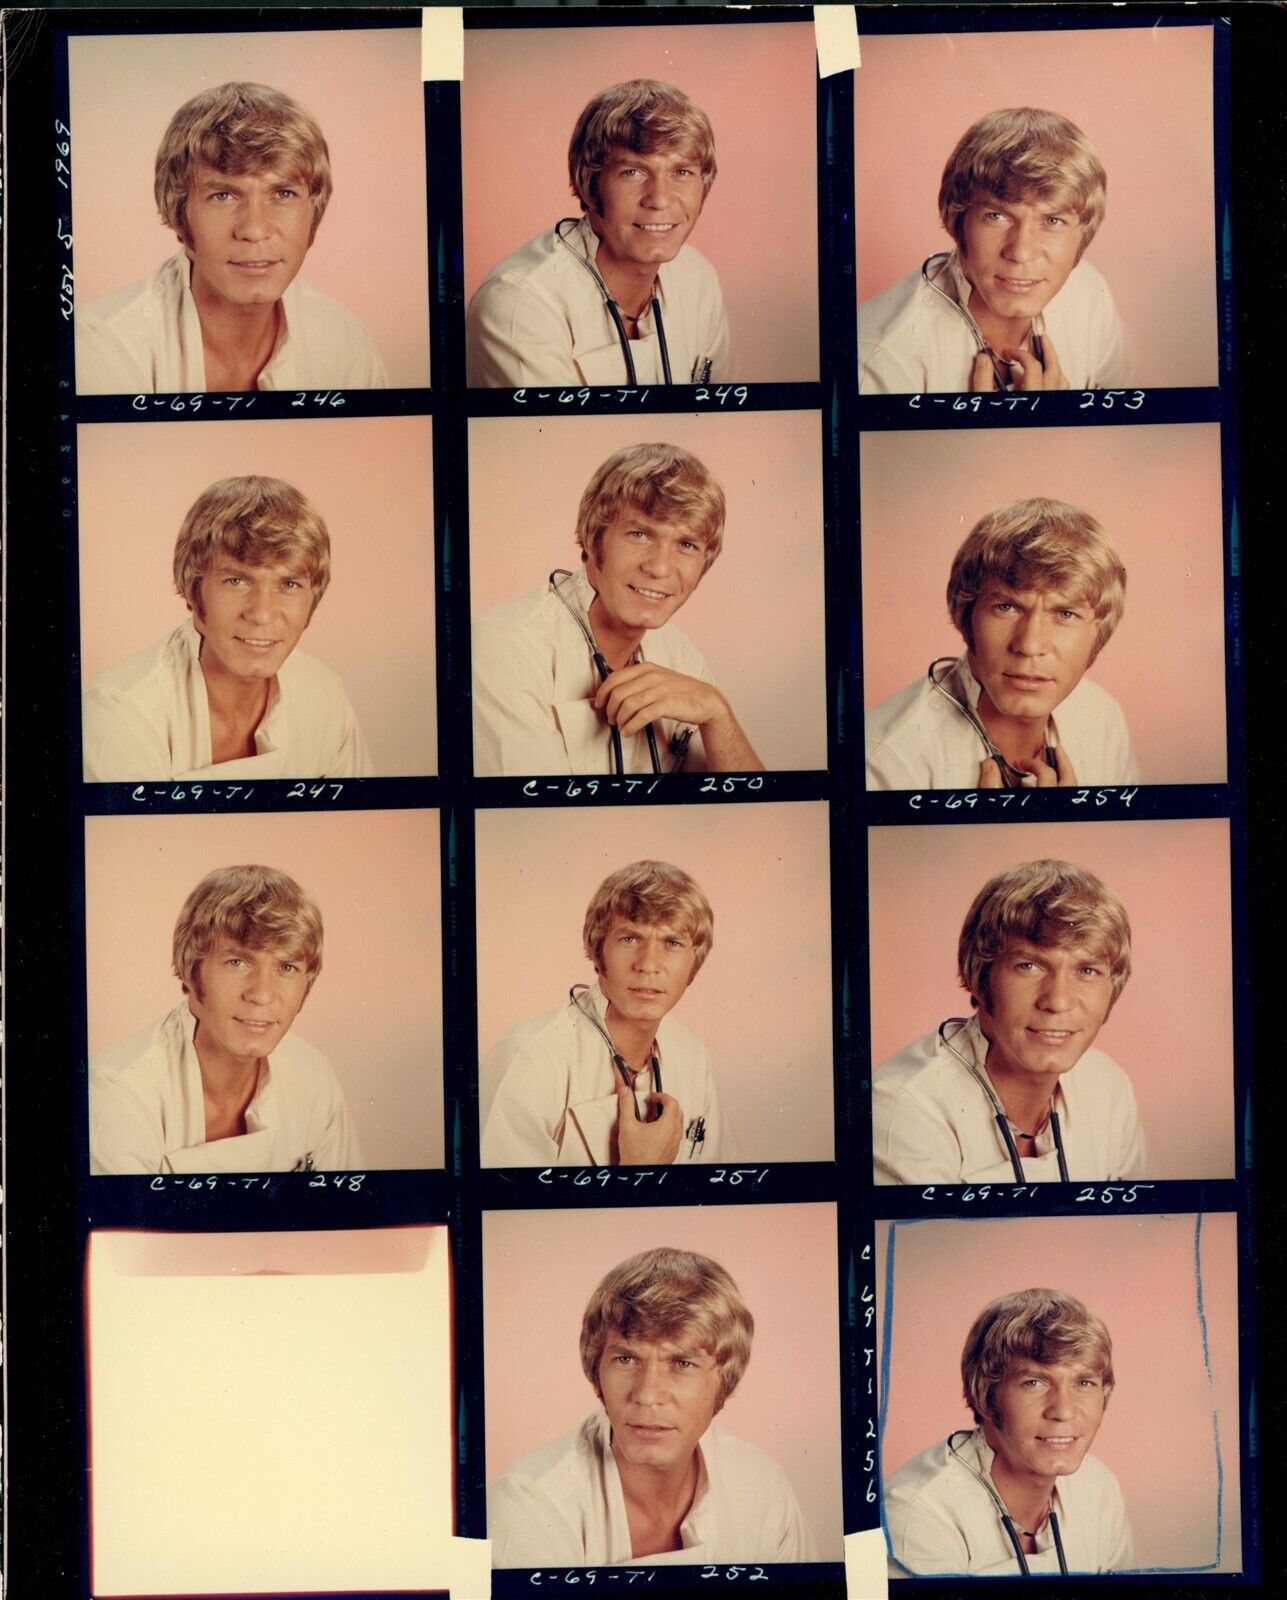 BR57 Rare Orig Color Contact Sheet Photo HANDSOME BLOND CELEBRITY Actor Doctor